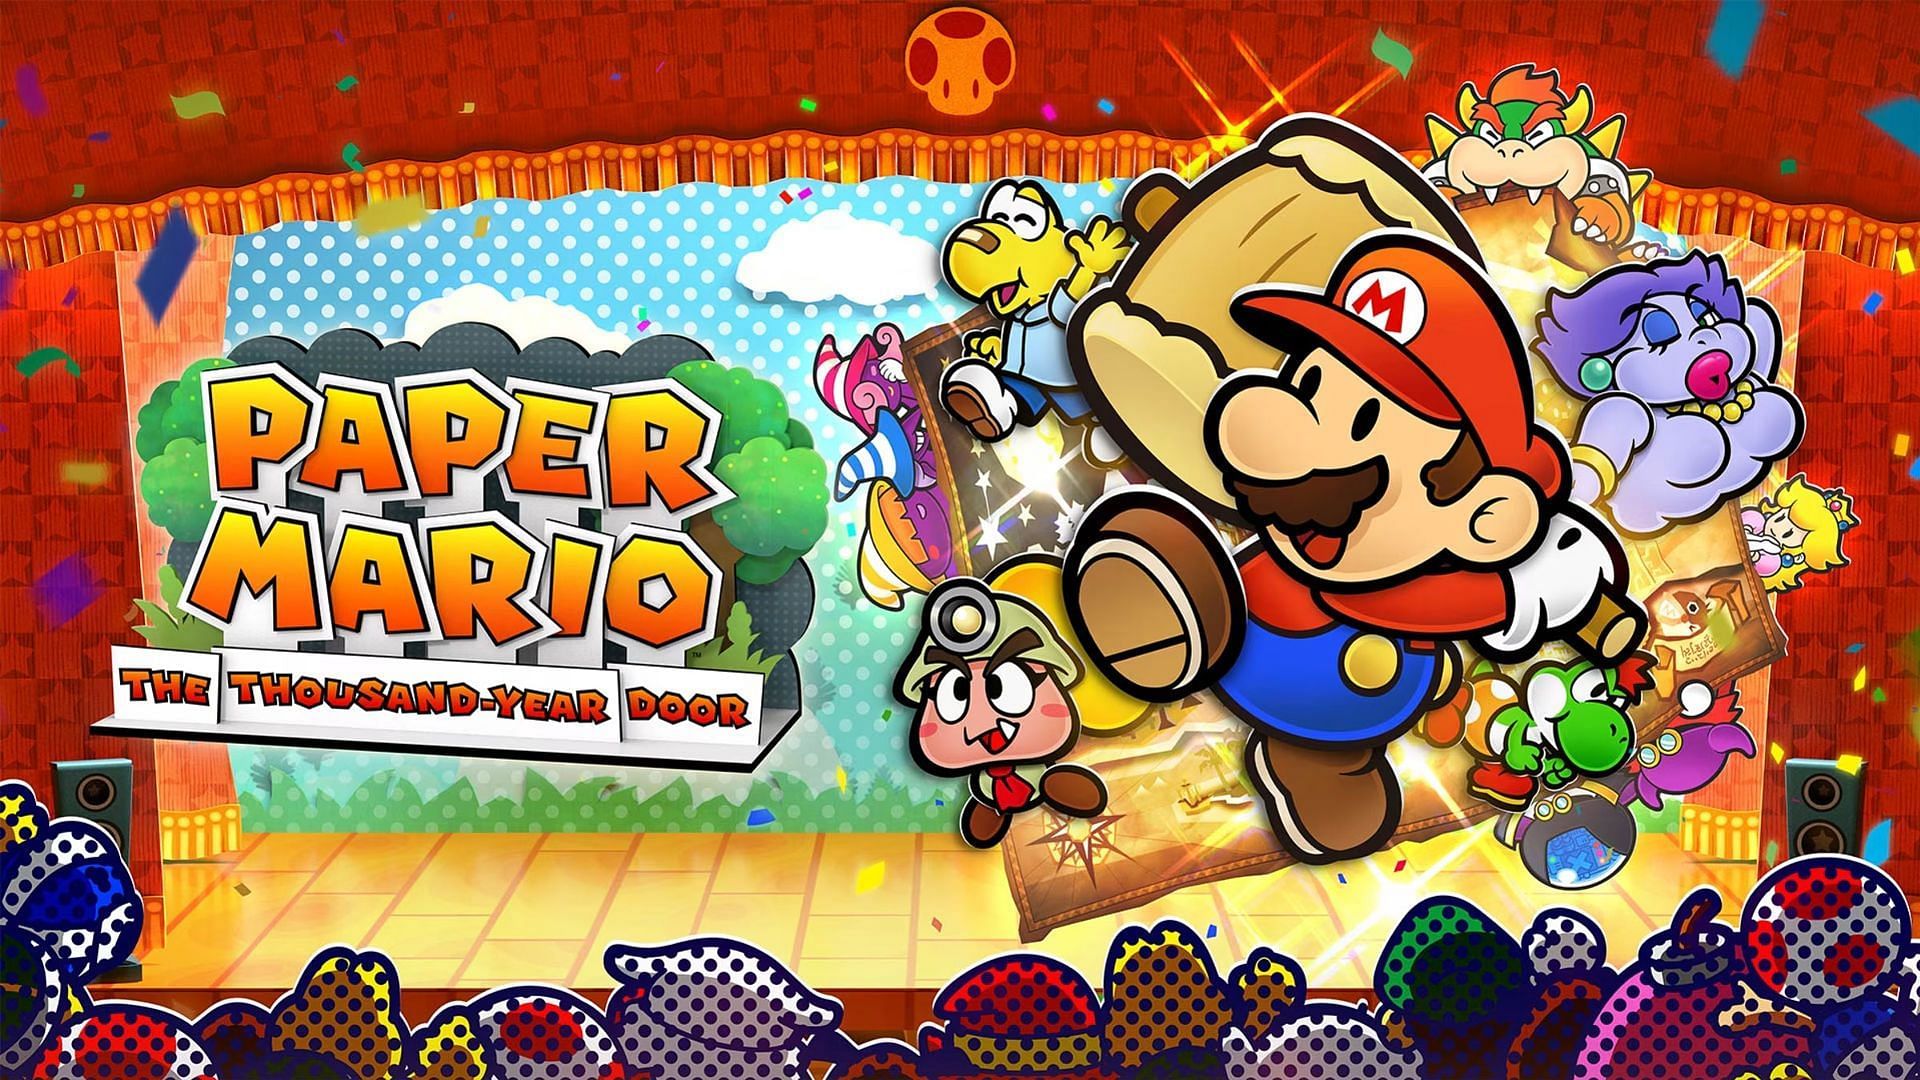 Paper Mario: The Thousand-Year Door promotional image